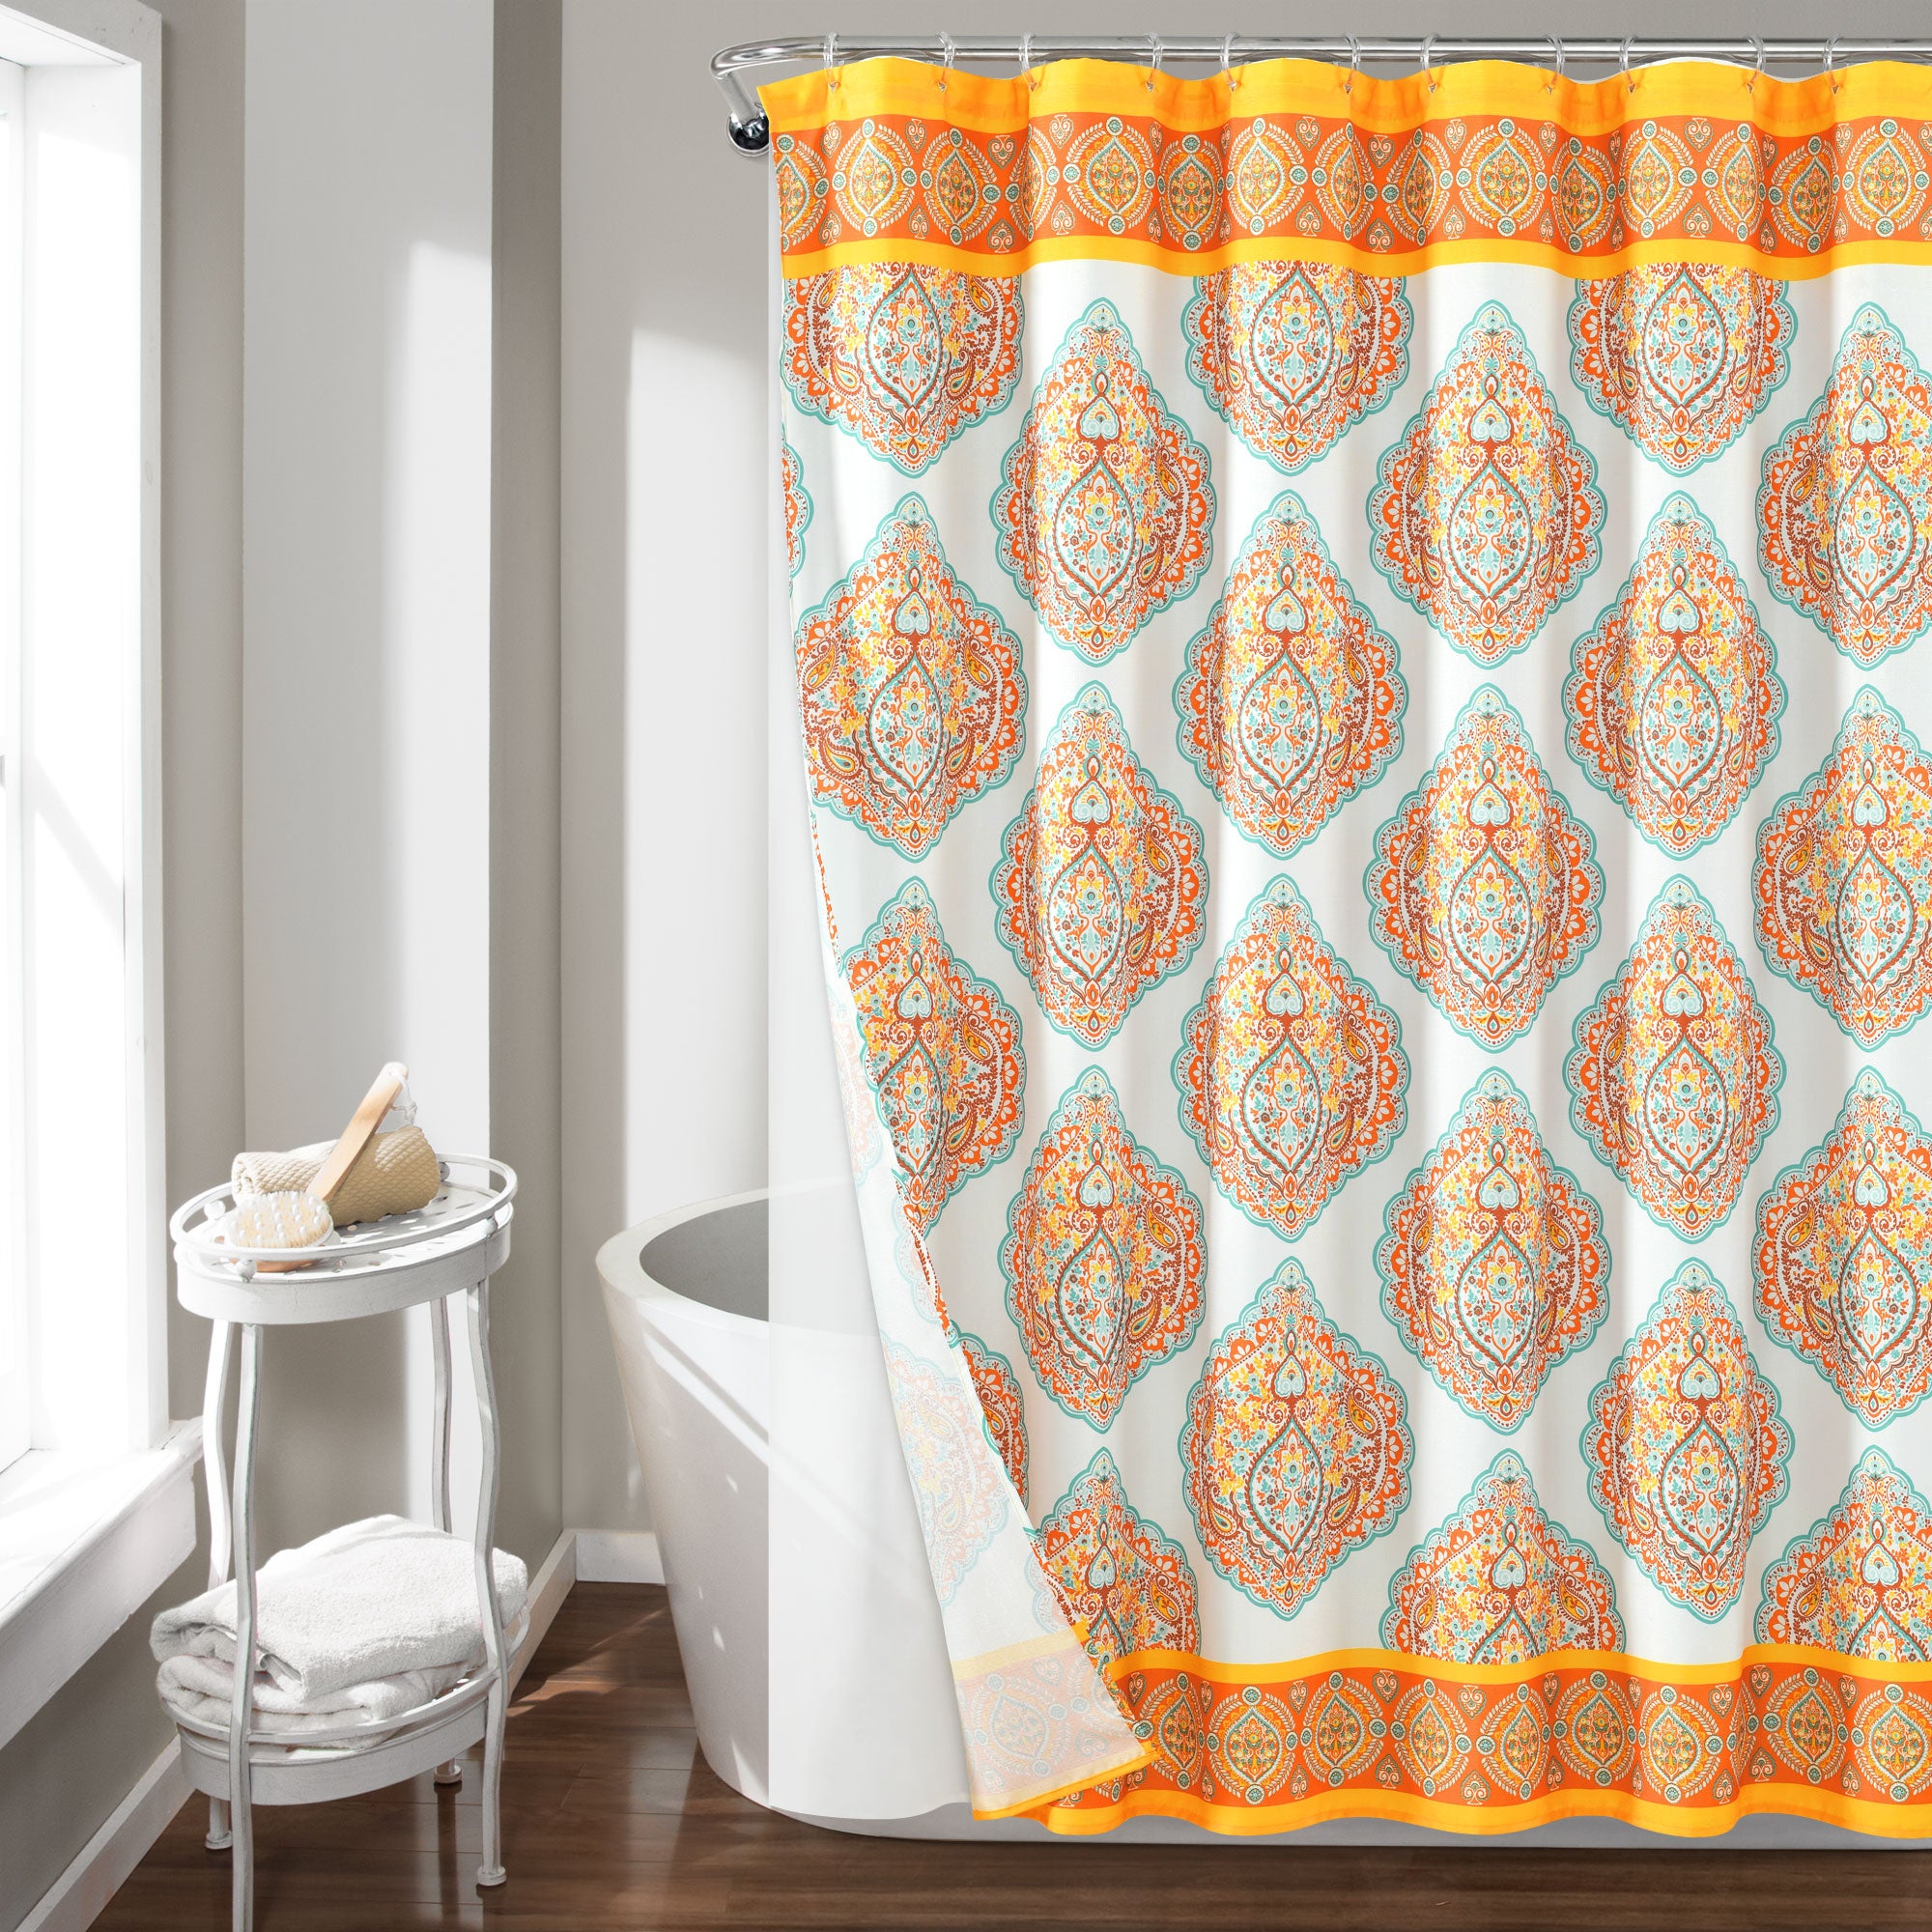 Harley Shower Curtain Orange with Peva Lining and Rings 14Pcs Complete Set